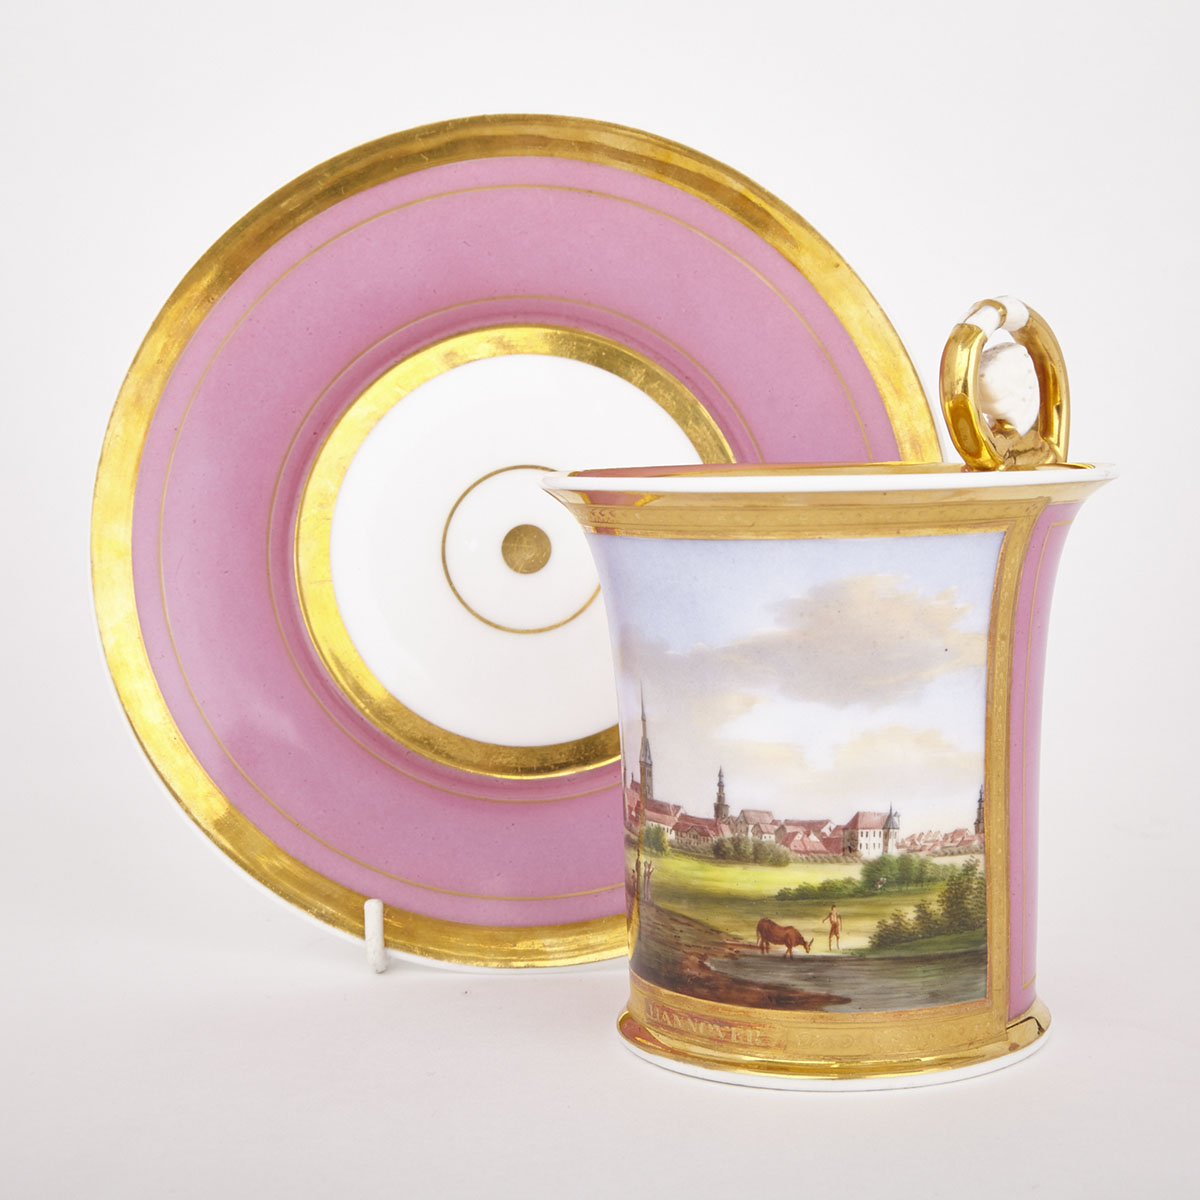 Paris Porcelain Topographical Pink Ground Cup and Saucer, mid-19th century